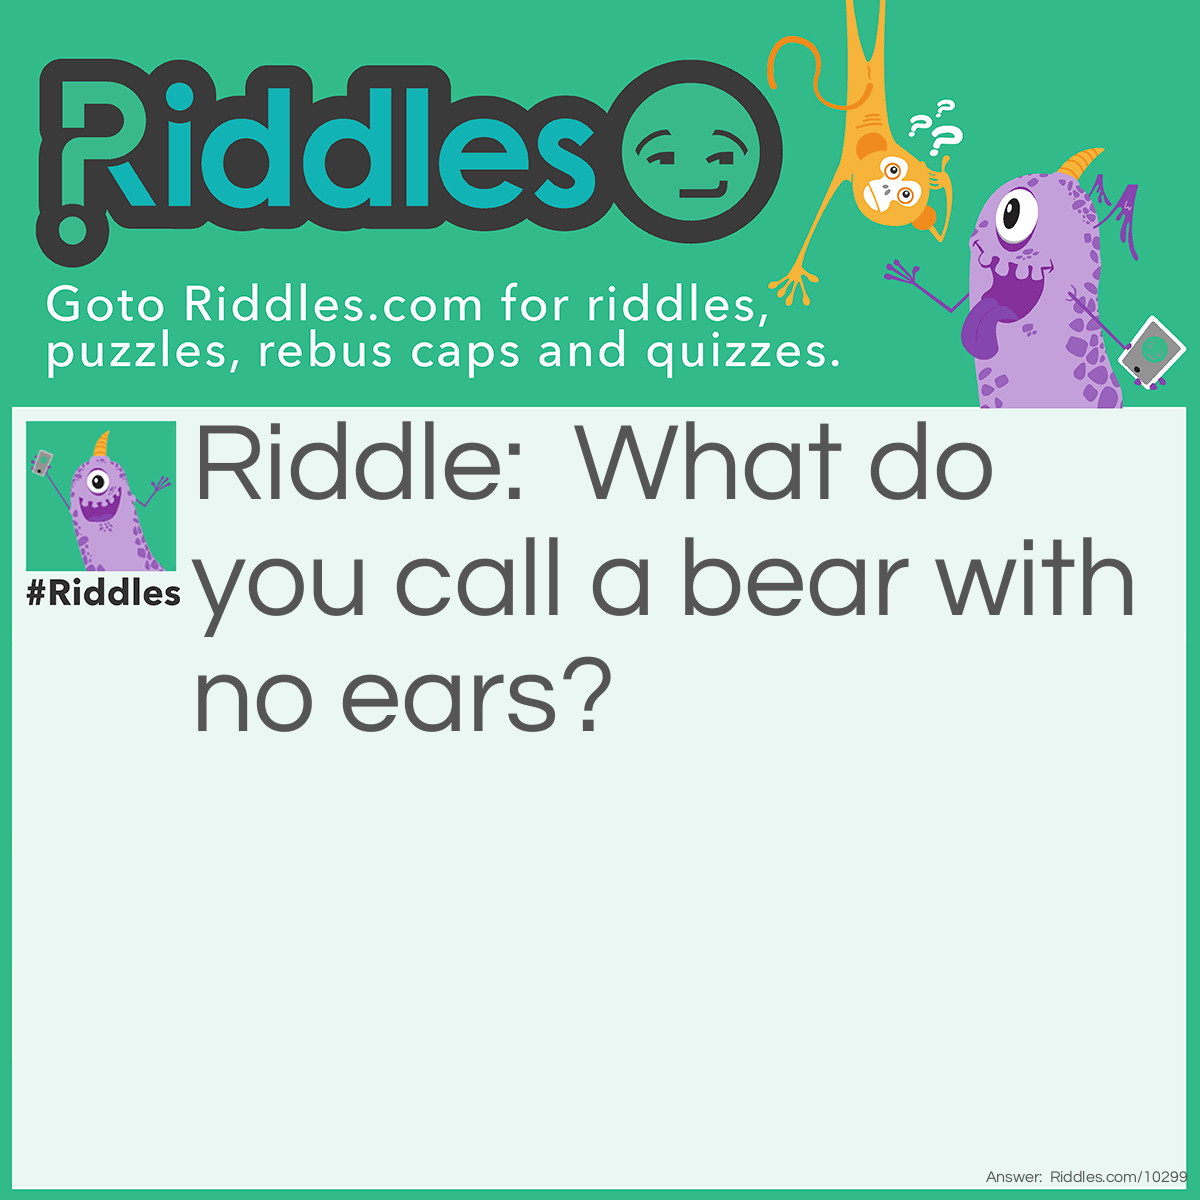 Riddle: What do you call a bear with no ears? Answer: The letter B.